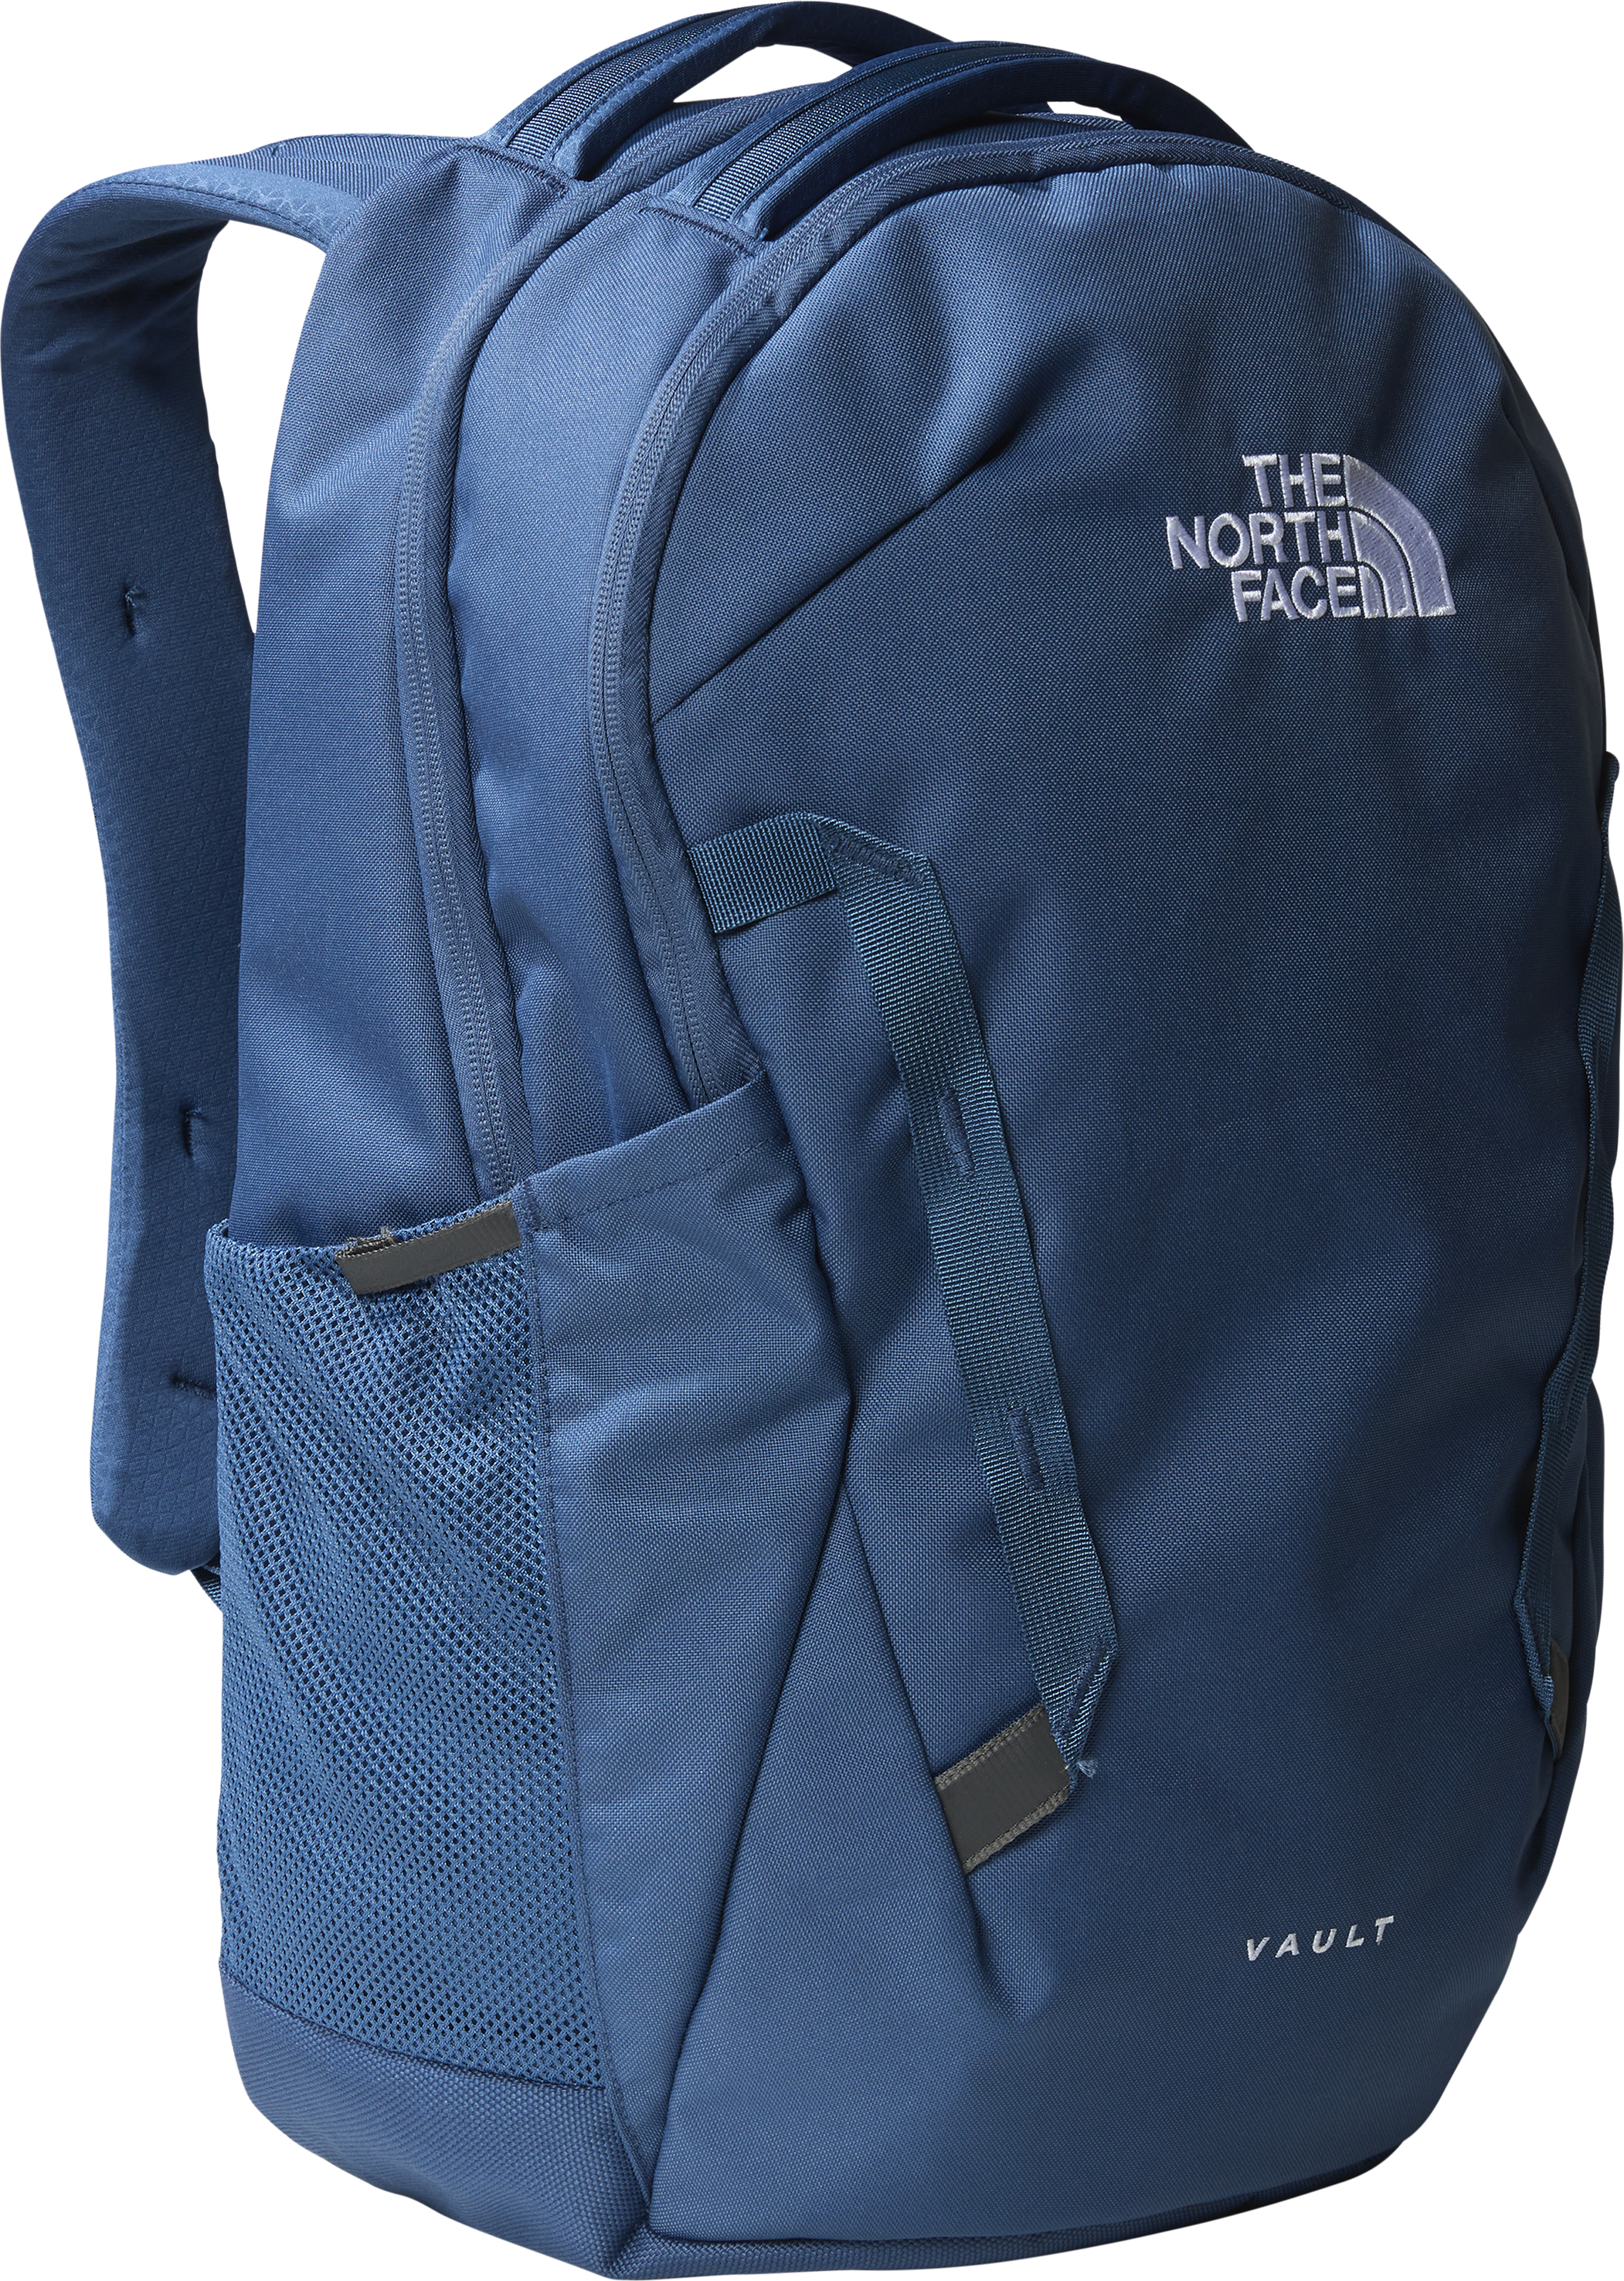 The North Face Vault Shady Blue/Tnf White